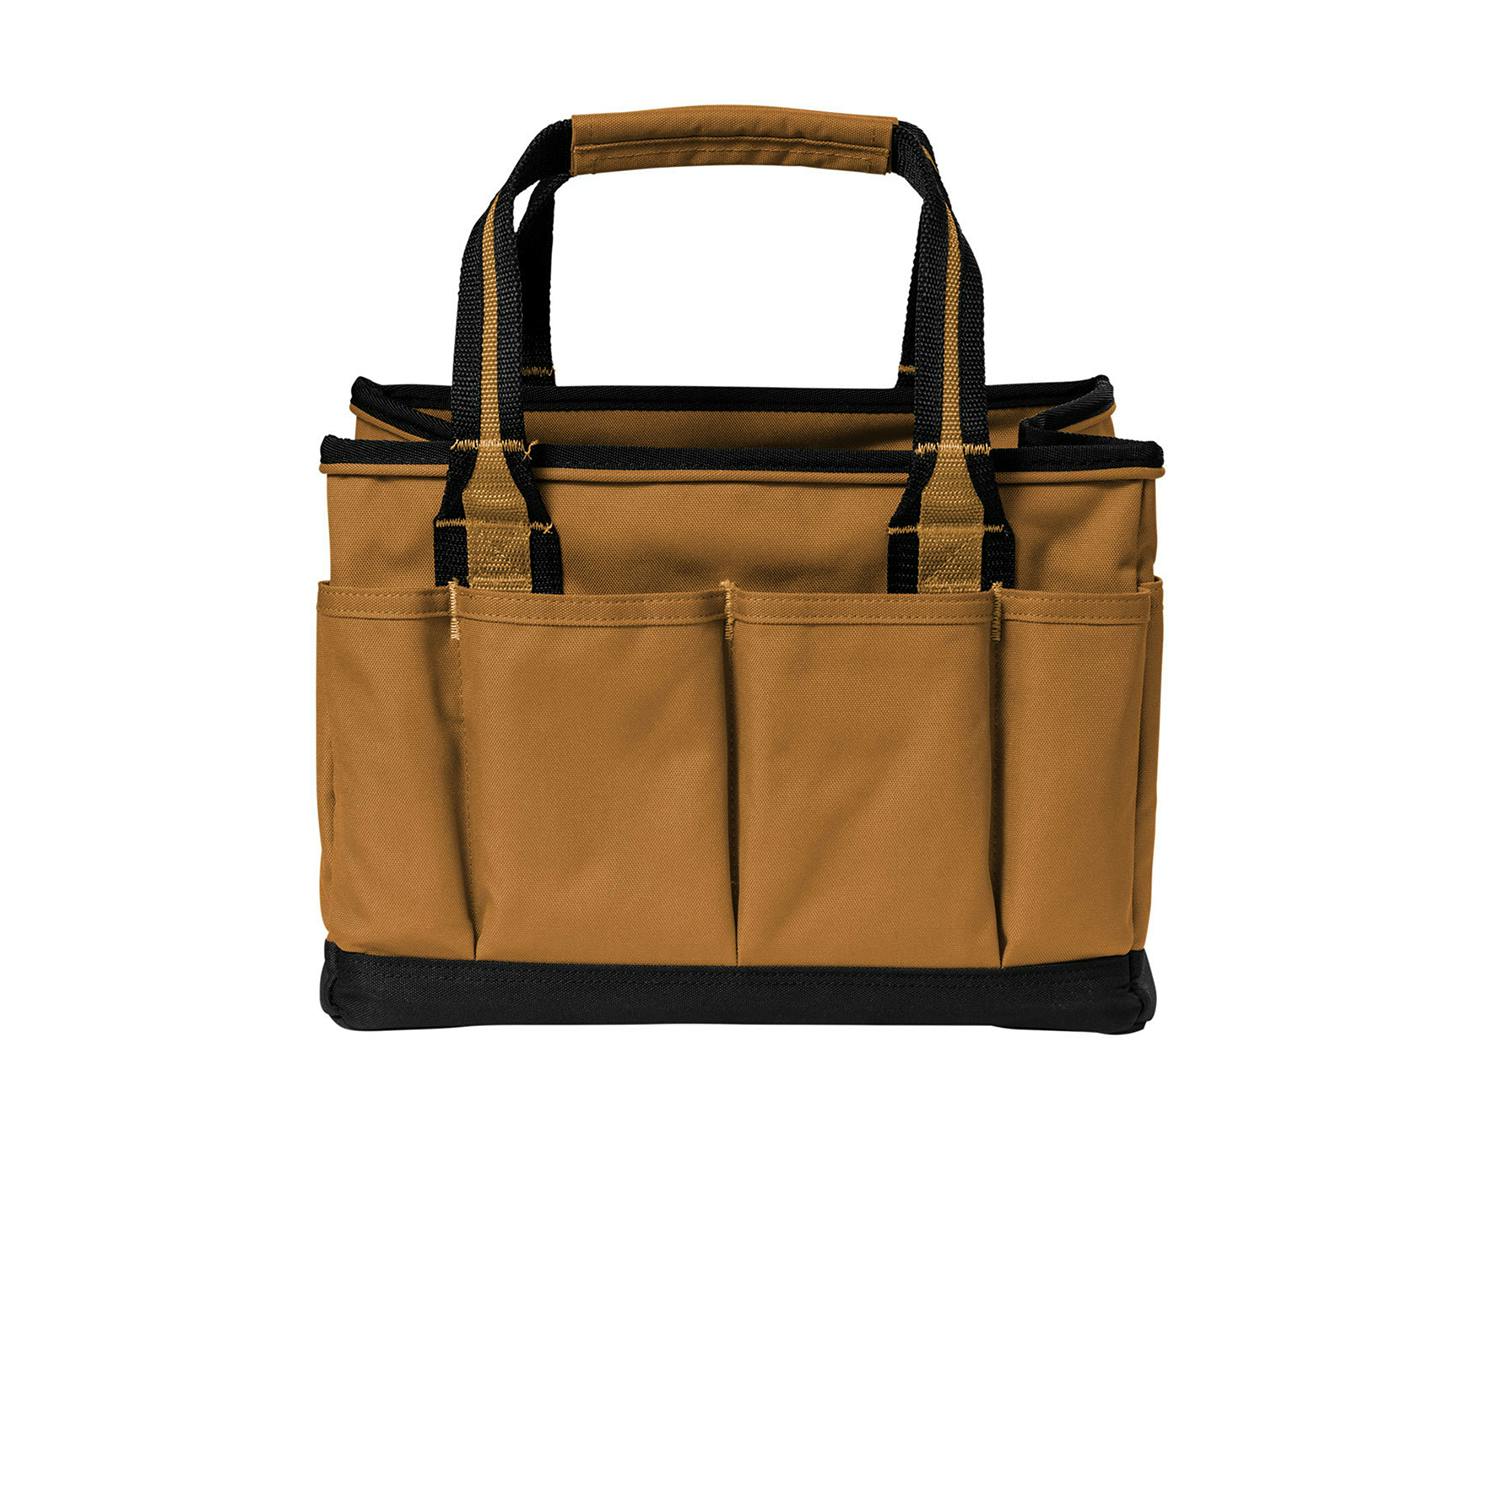 Carhartt Utility Tote Bag - additional Image 1